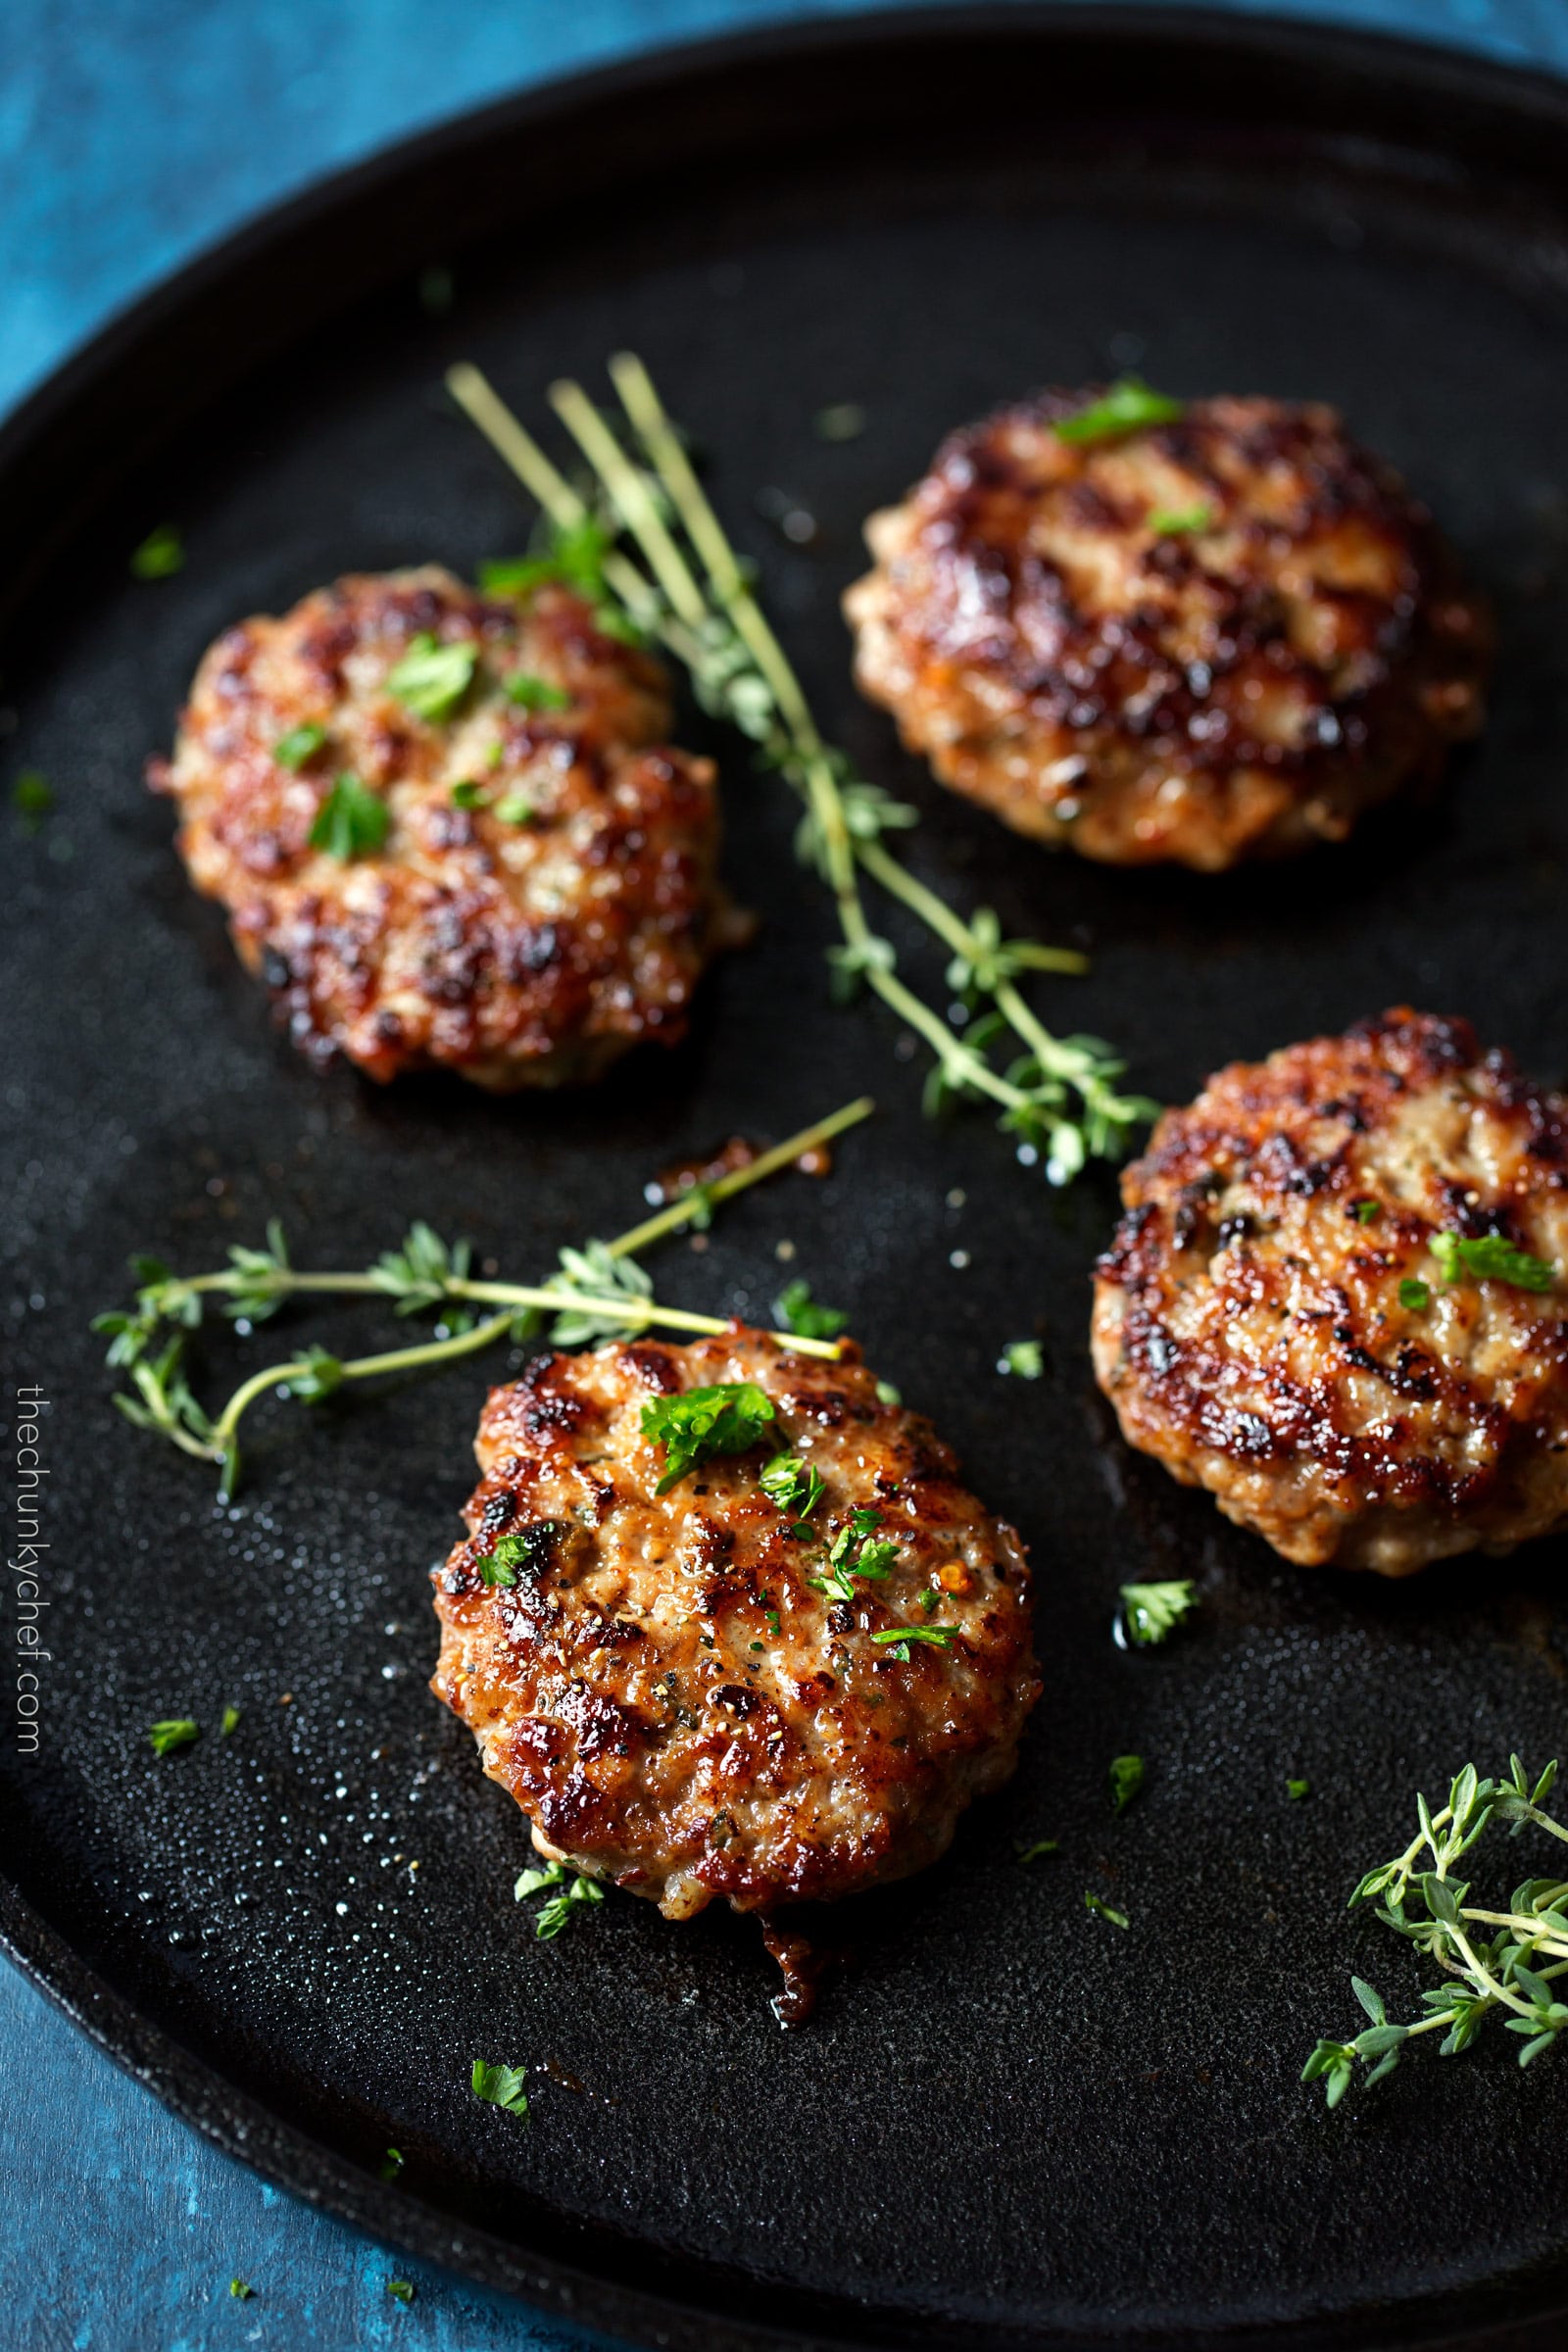 Homemade Maple Breakfast Sausage | These breakfast sausage patties are made with a combo of ground turkey and pork, savory herbs, and sweet maple syrup. The mouthwatering combo gives way to a low calorie homemade version of your favorite breakfast food! | http://thechunkychef.com